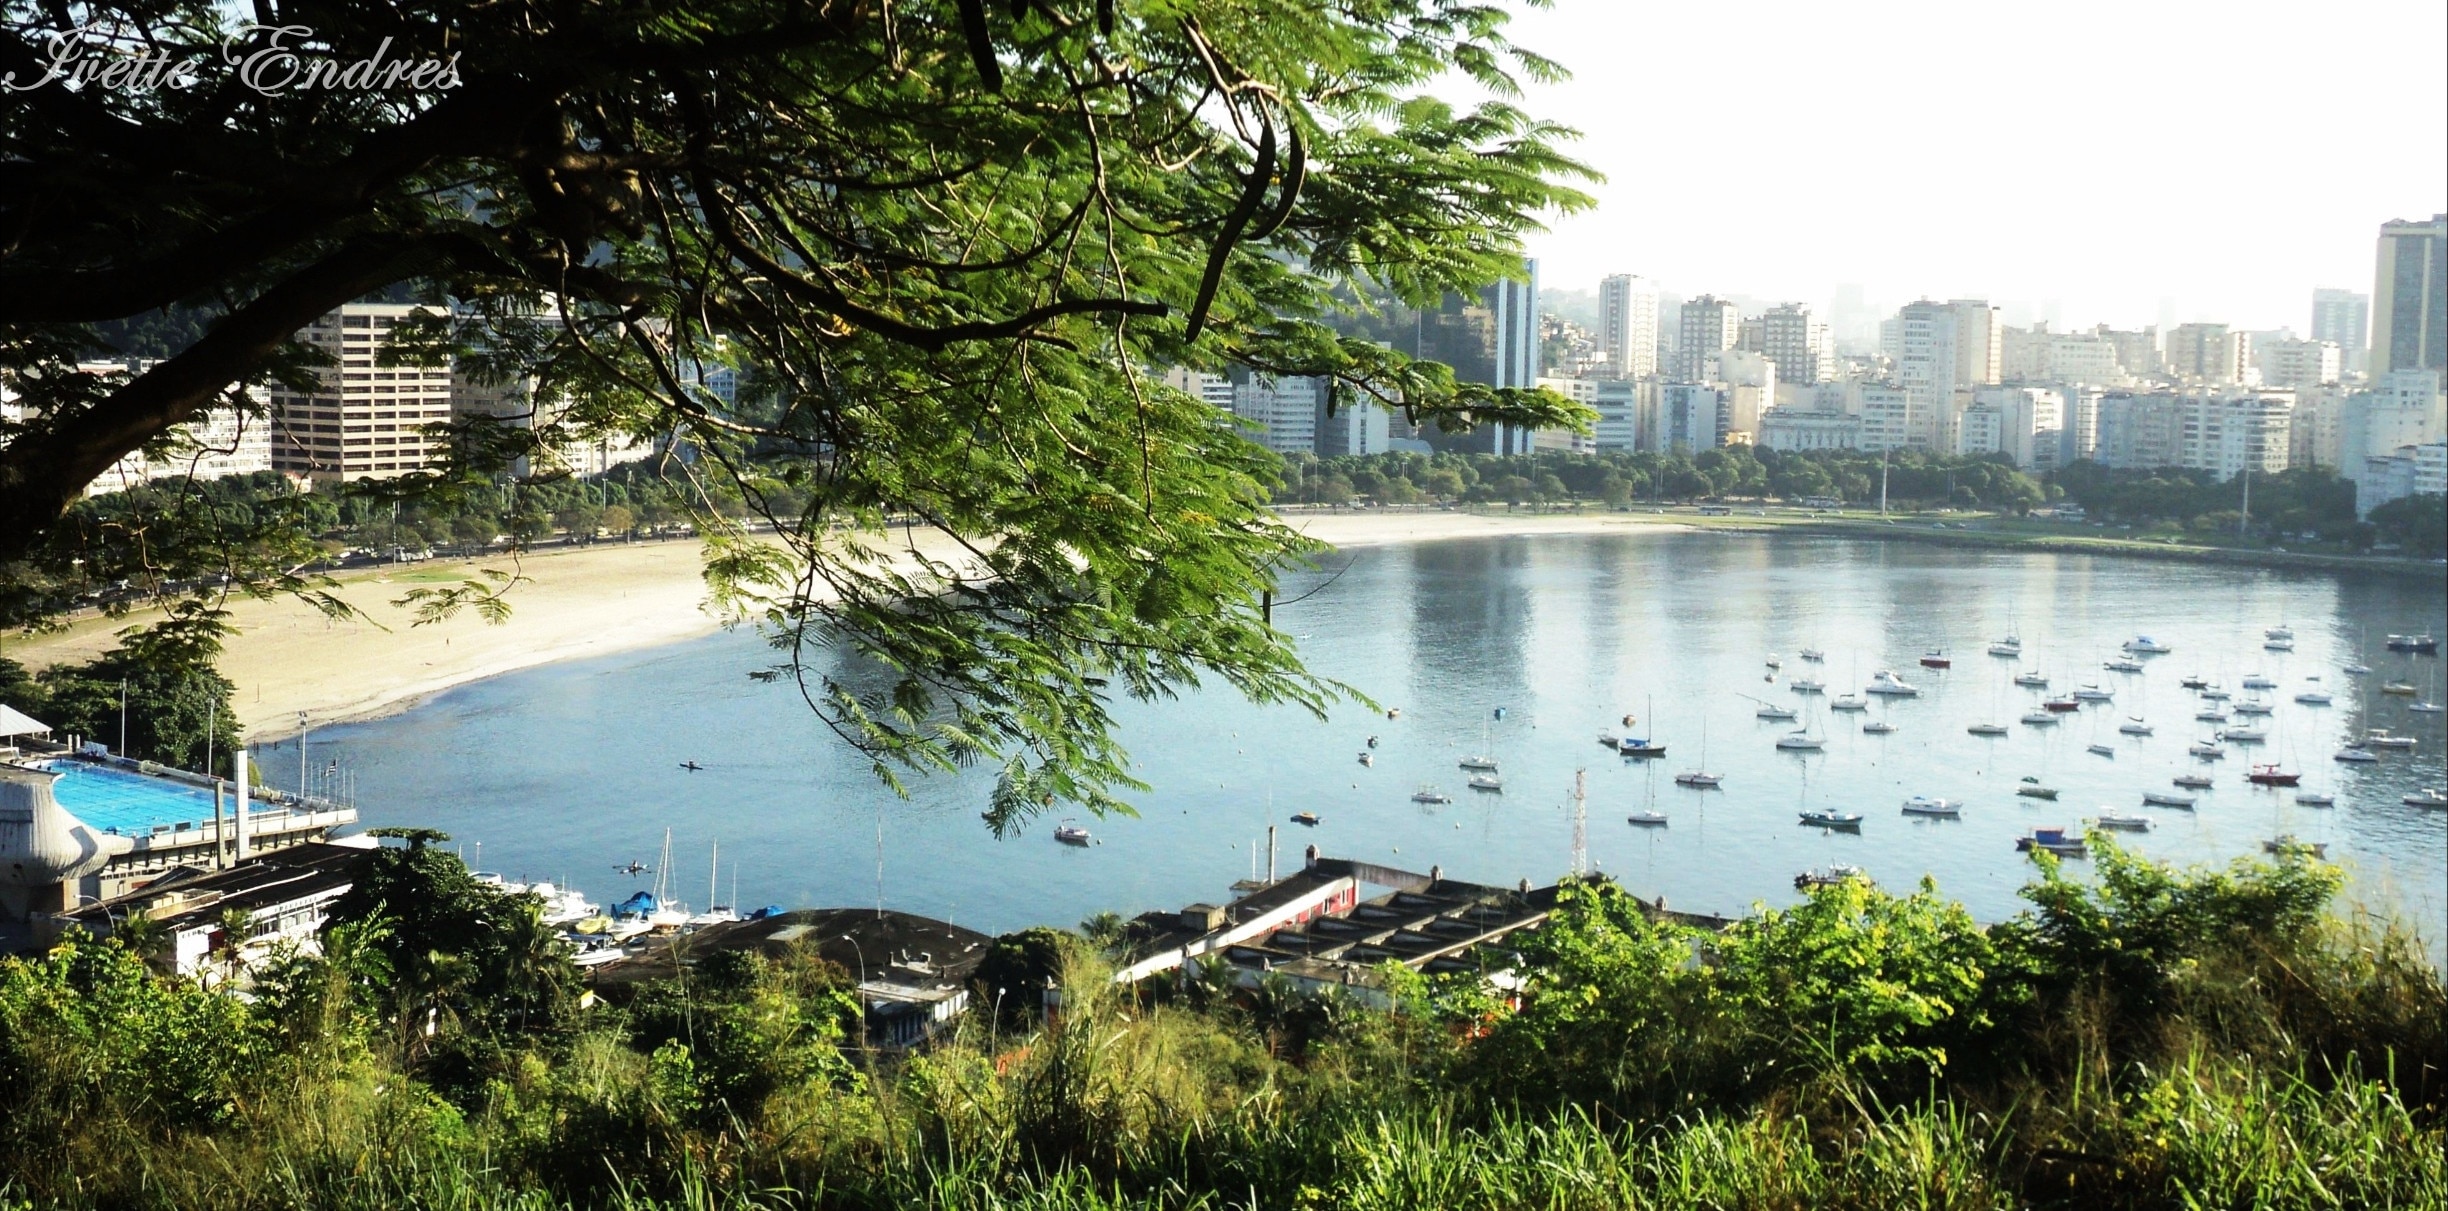 You can get a nice view of Botafogo beach and if you like the cats, this will be your favorite place in Rio de Janeiro :D